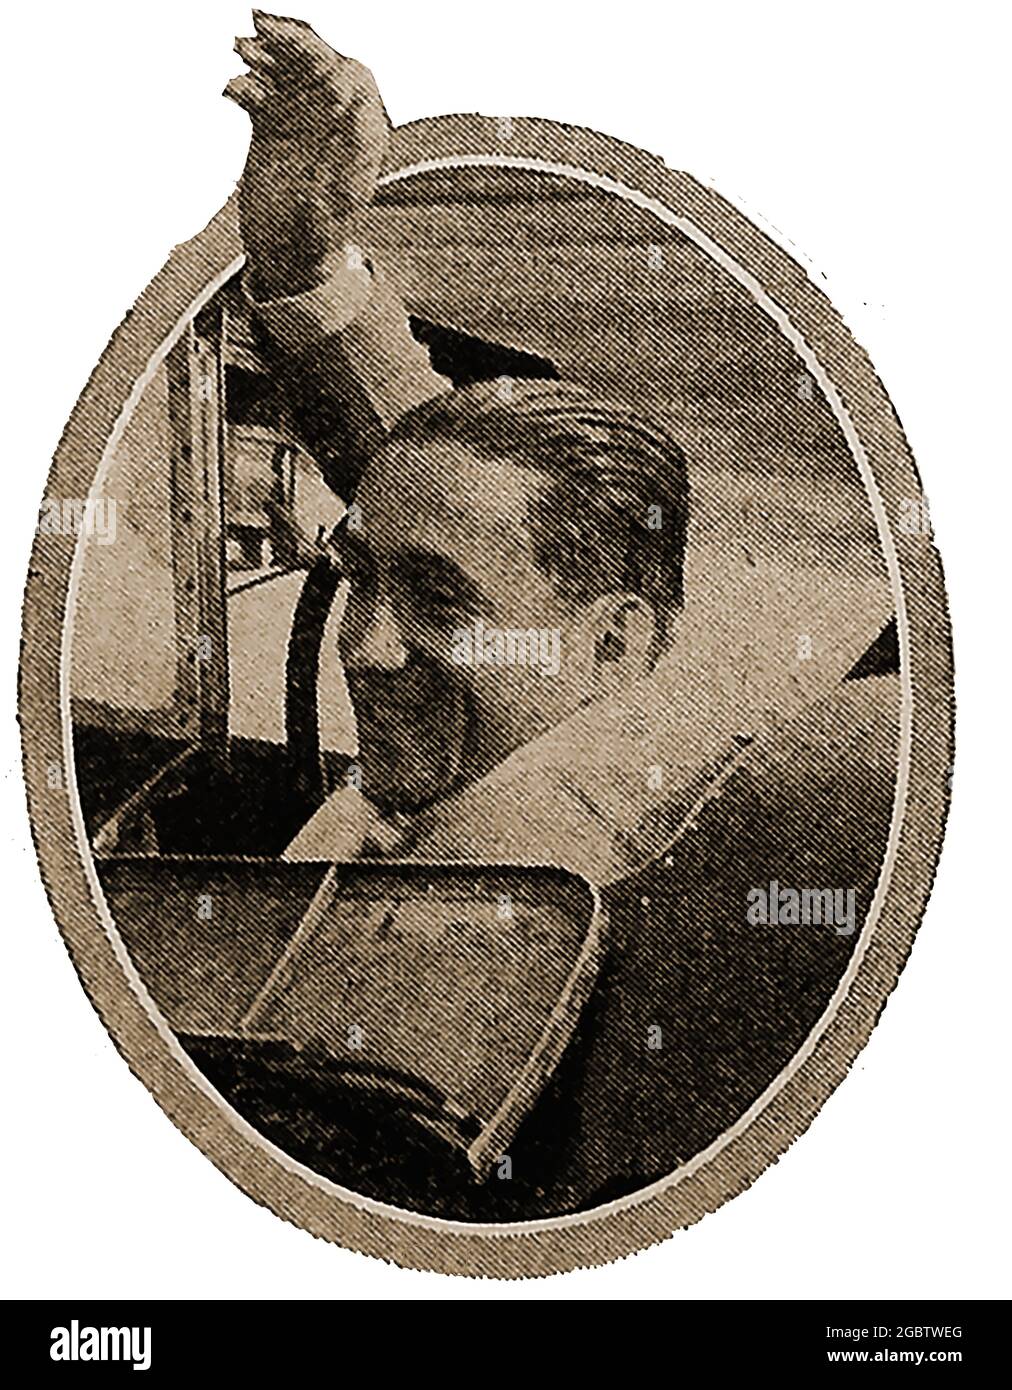 A 1929 press portrait of  French air flight pioneer Dieudonne Costes on his Paris to Texas flight. Costes  (1892 – 1973) was a French aviator who set  a number of flight distance records and was credited as  a fighter ace during World War I. On 2 May 1928, He was awarded multiple awards including the Distinguished Flying Cross by special act of the Congress of the United States in recognition of his historic around the world flight Stock Photo